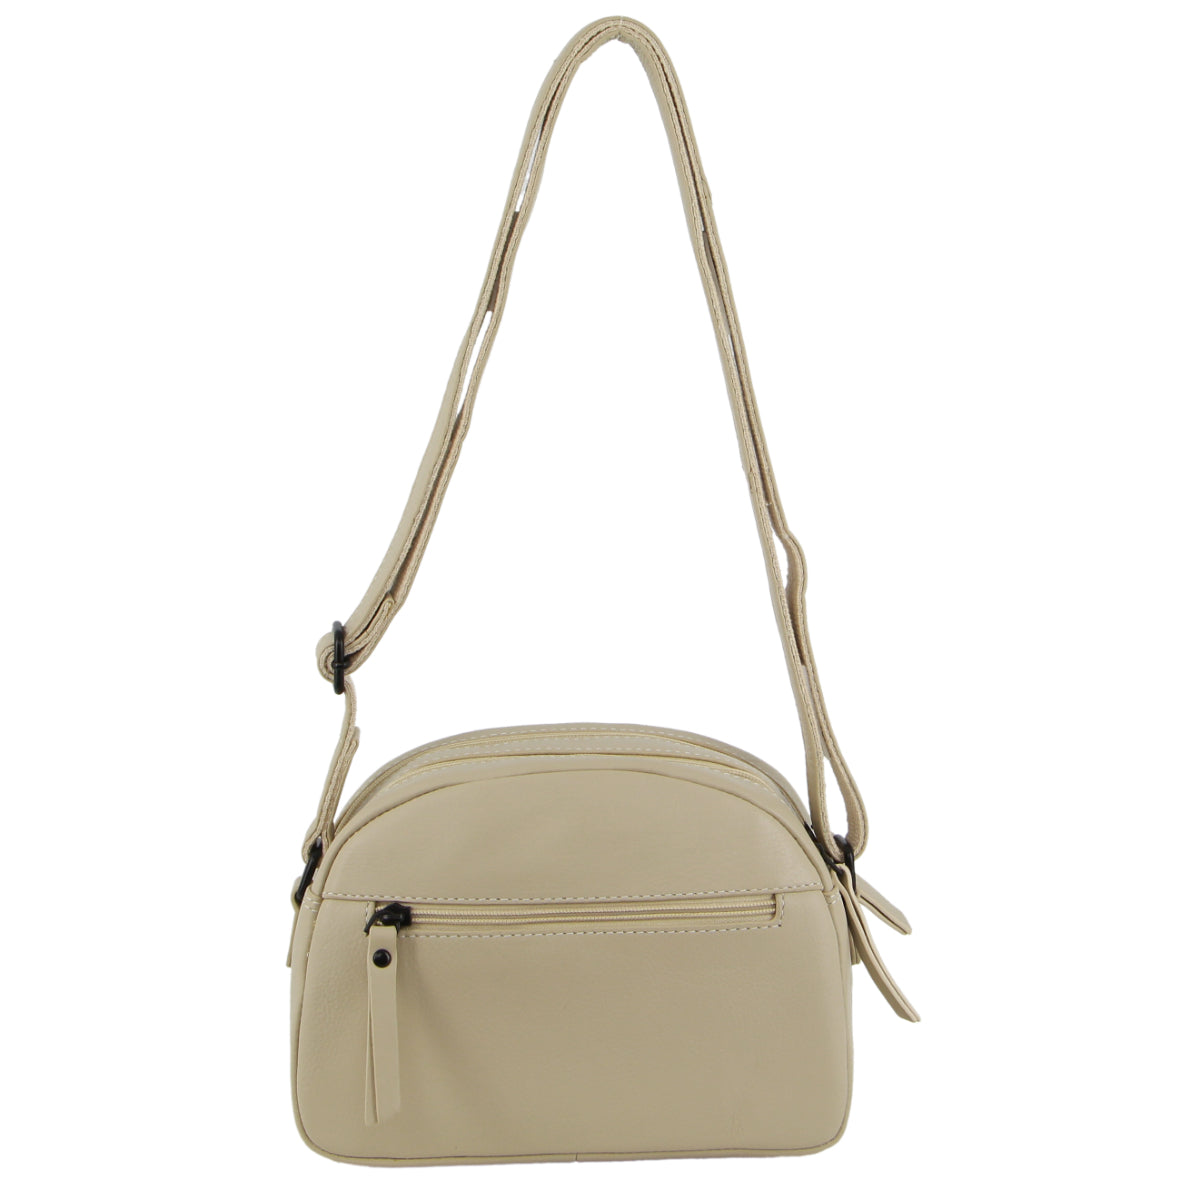 Milleni - NL3869 Small rounded leather sidebag - Cement-1